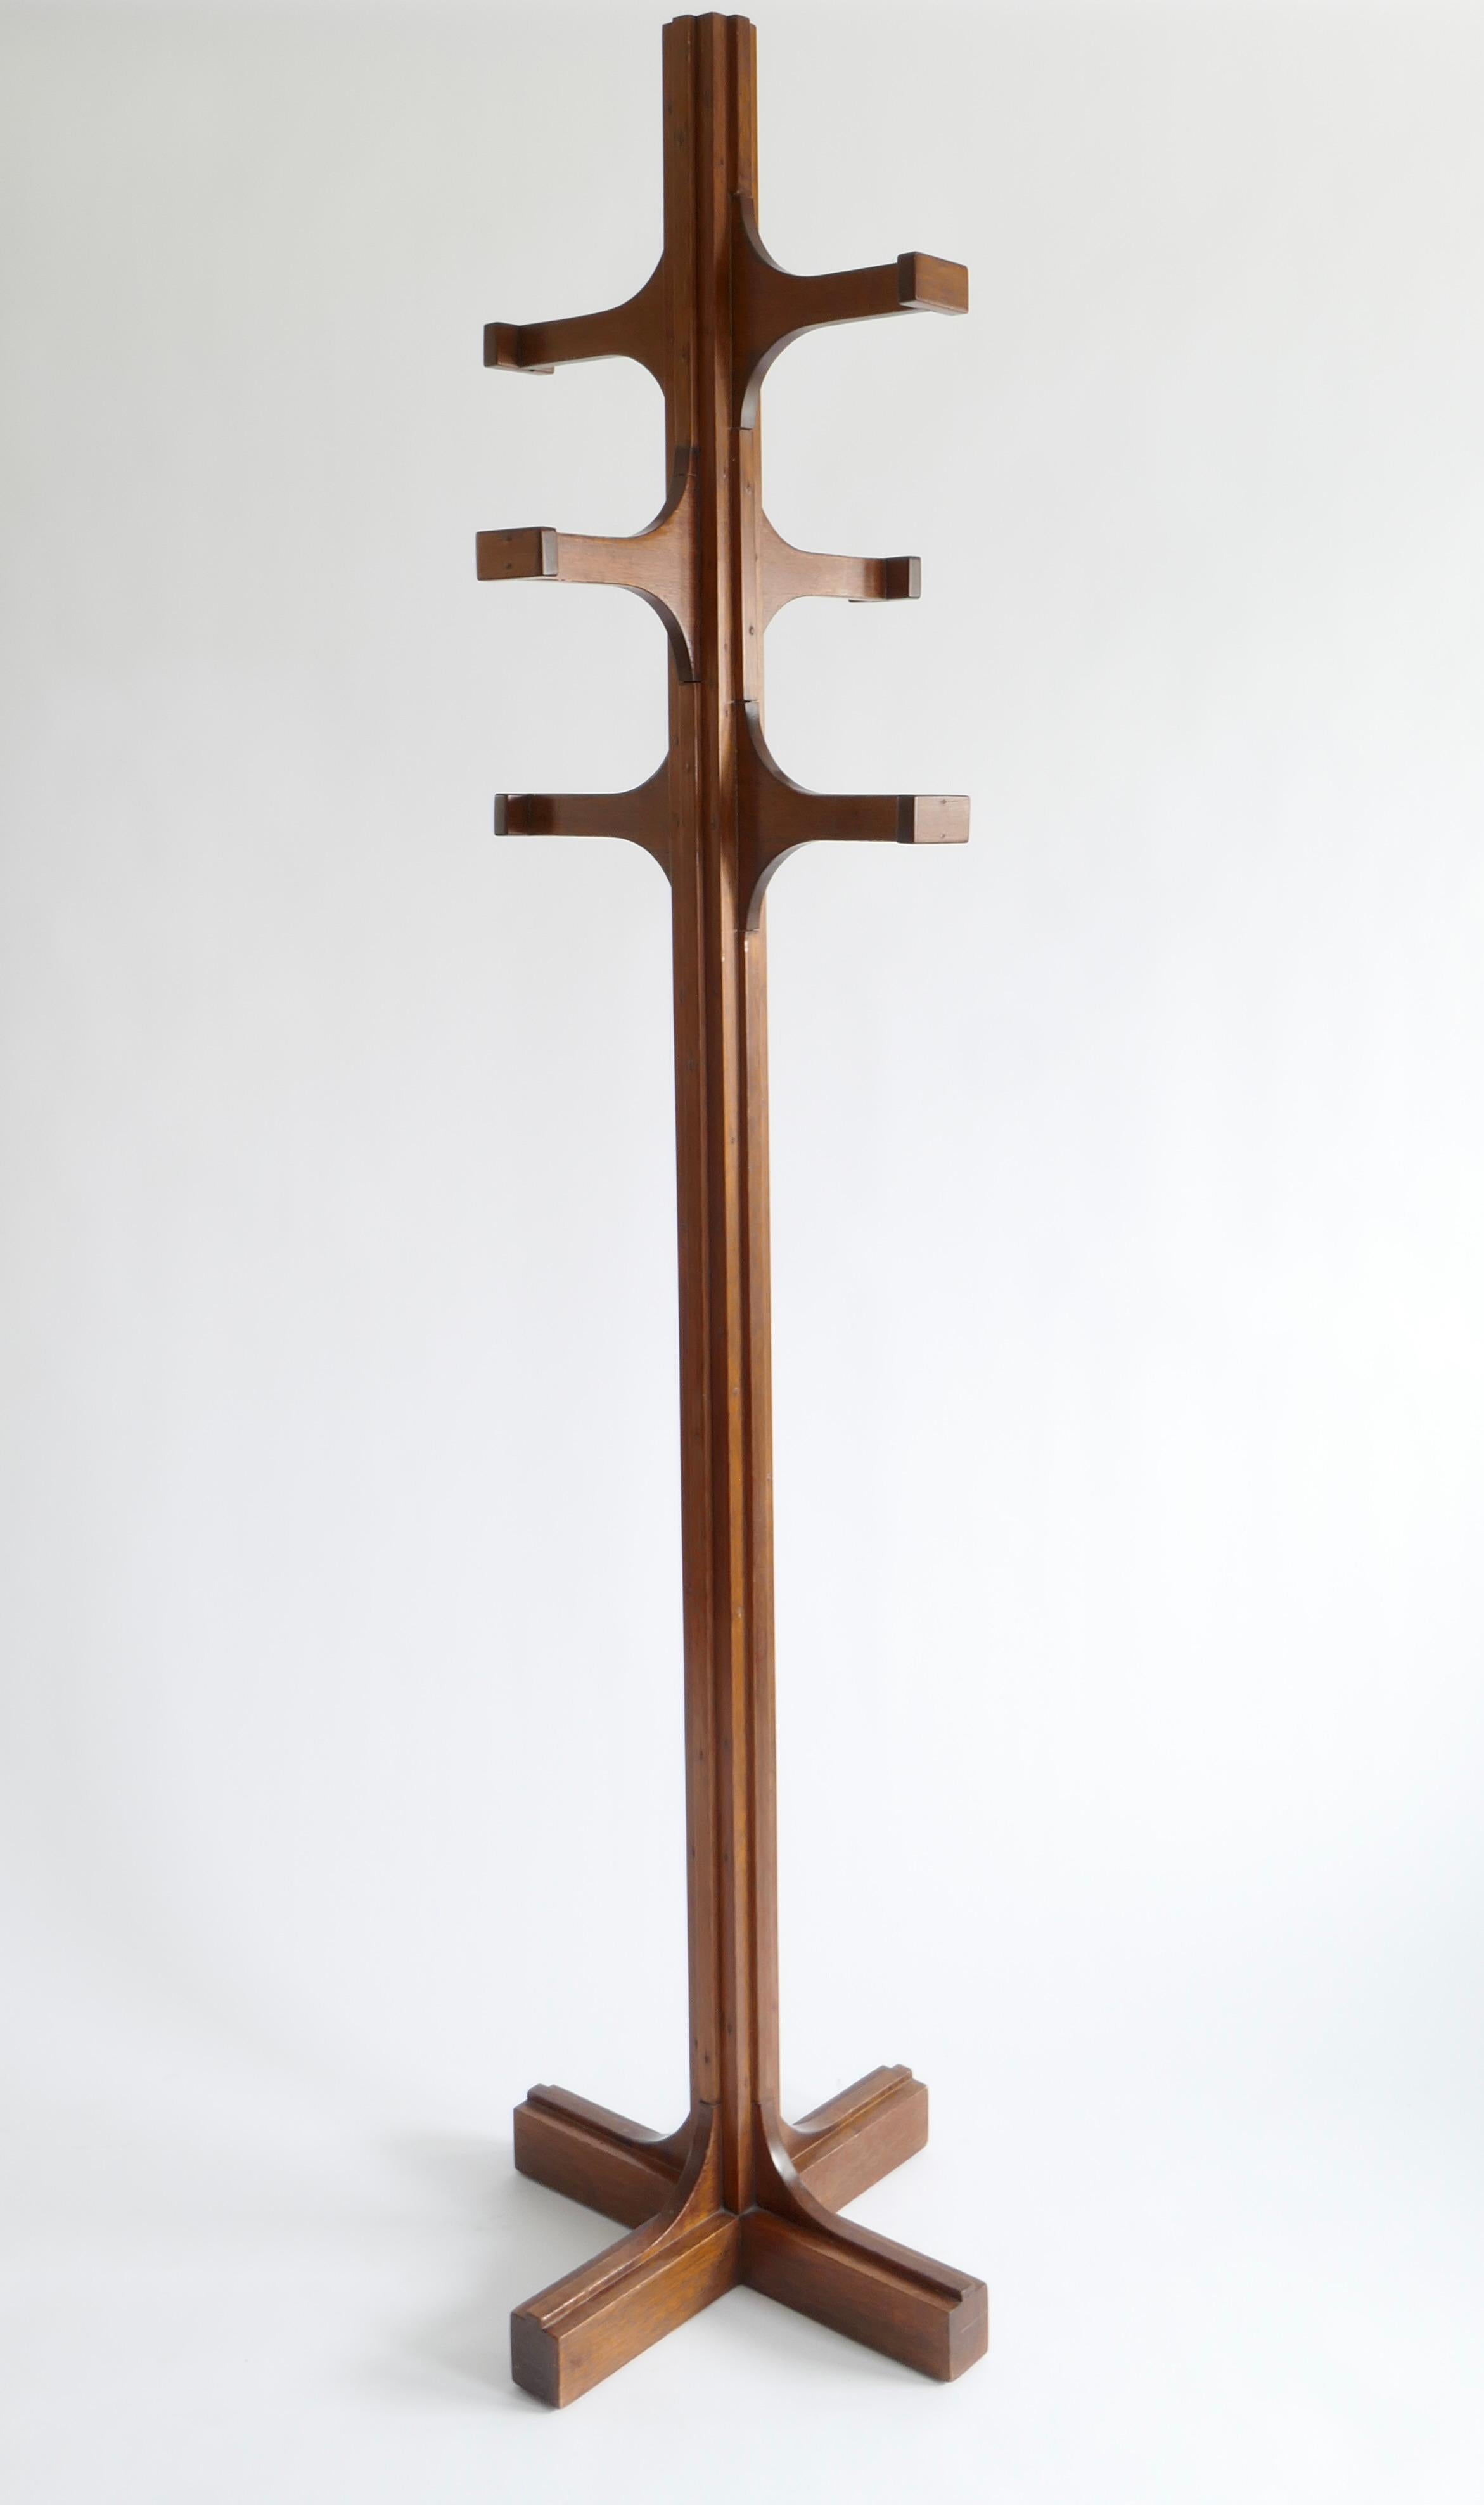 A tall sculptural coat stand designed by Giuseppe Rivadossi in the 1970s. 
The stand is made of patinated oak wood with a polished finish. Designed as a stylised TOTEM, this coat stand is both decorative and useful and an impressive statement piece